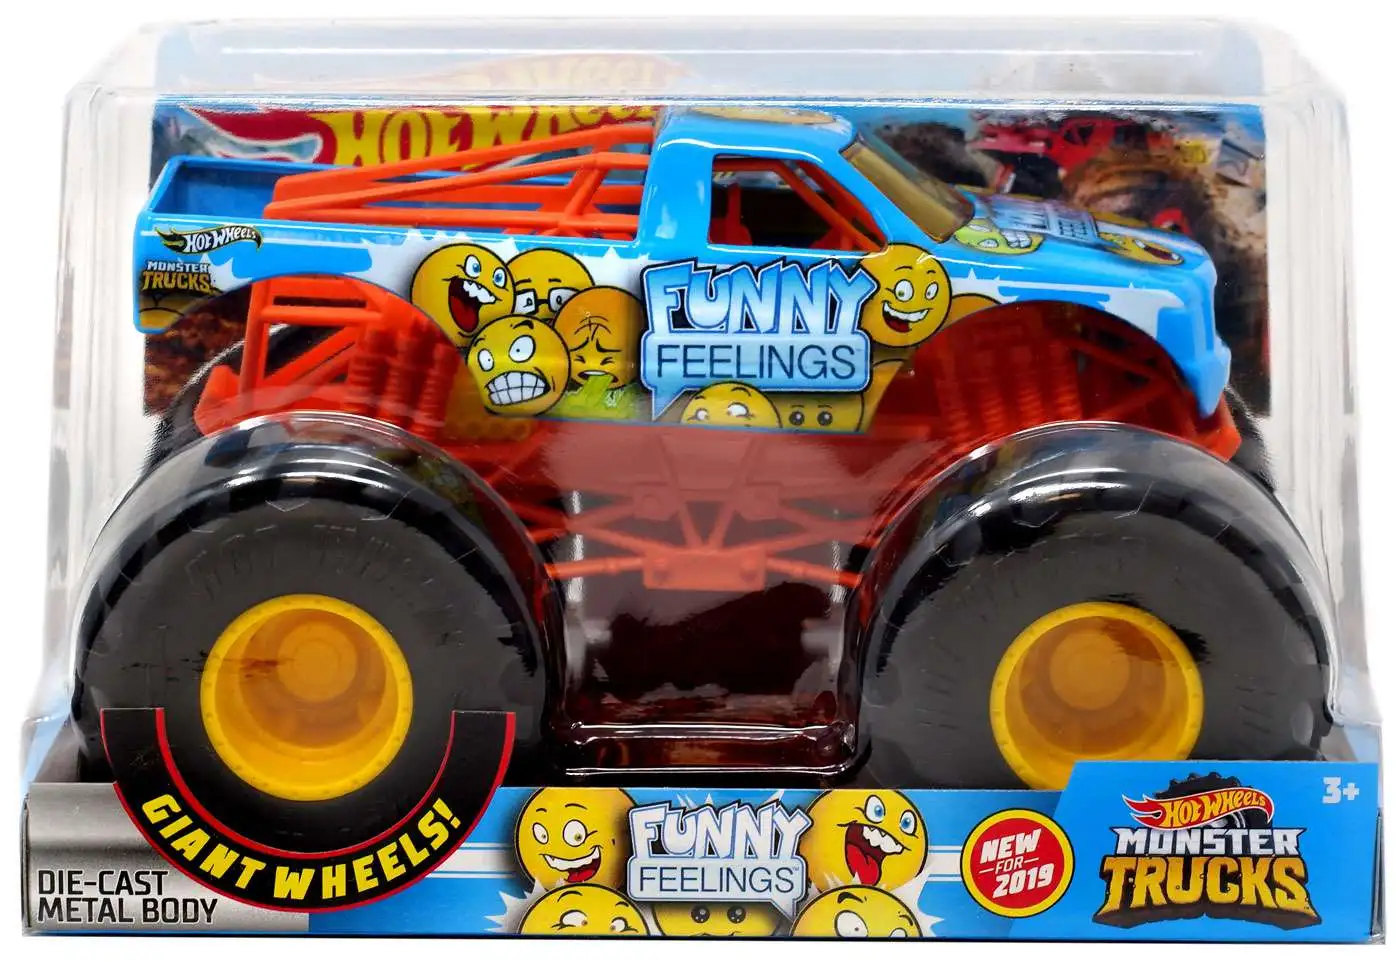  Hot Wheels Monster Trucks, Oversized Monster Truck Bone Shaker,  1:24 Scale Die-Cast Toy Truck with Giant Wheels and Cool Designs : Toys &  Games